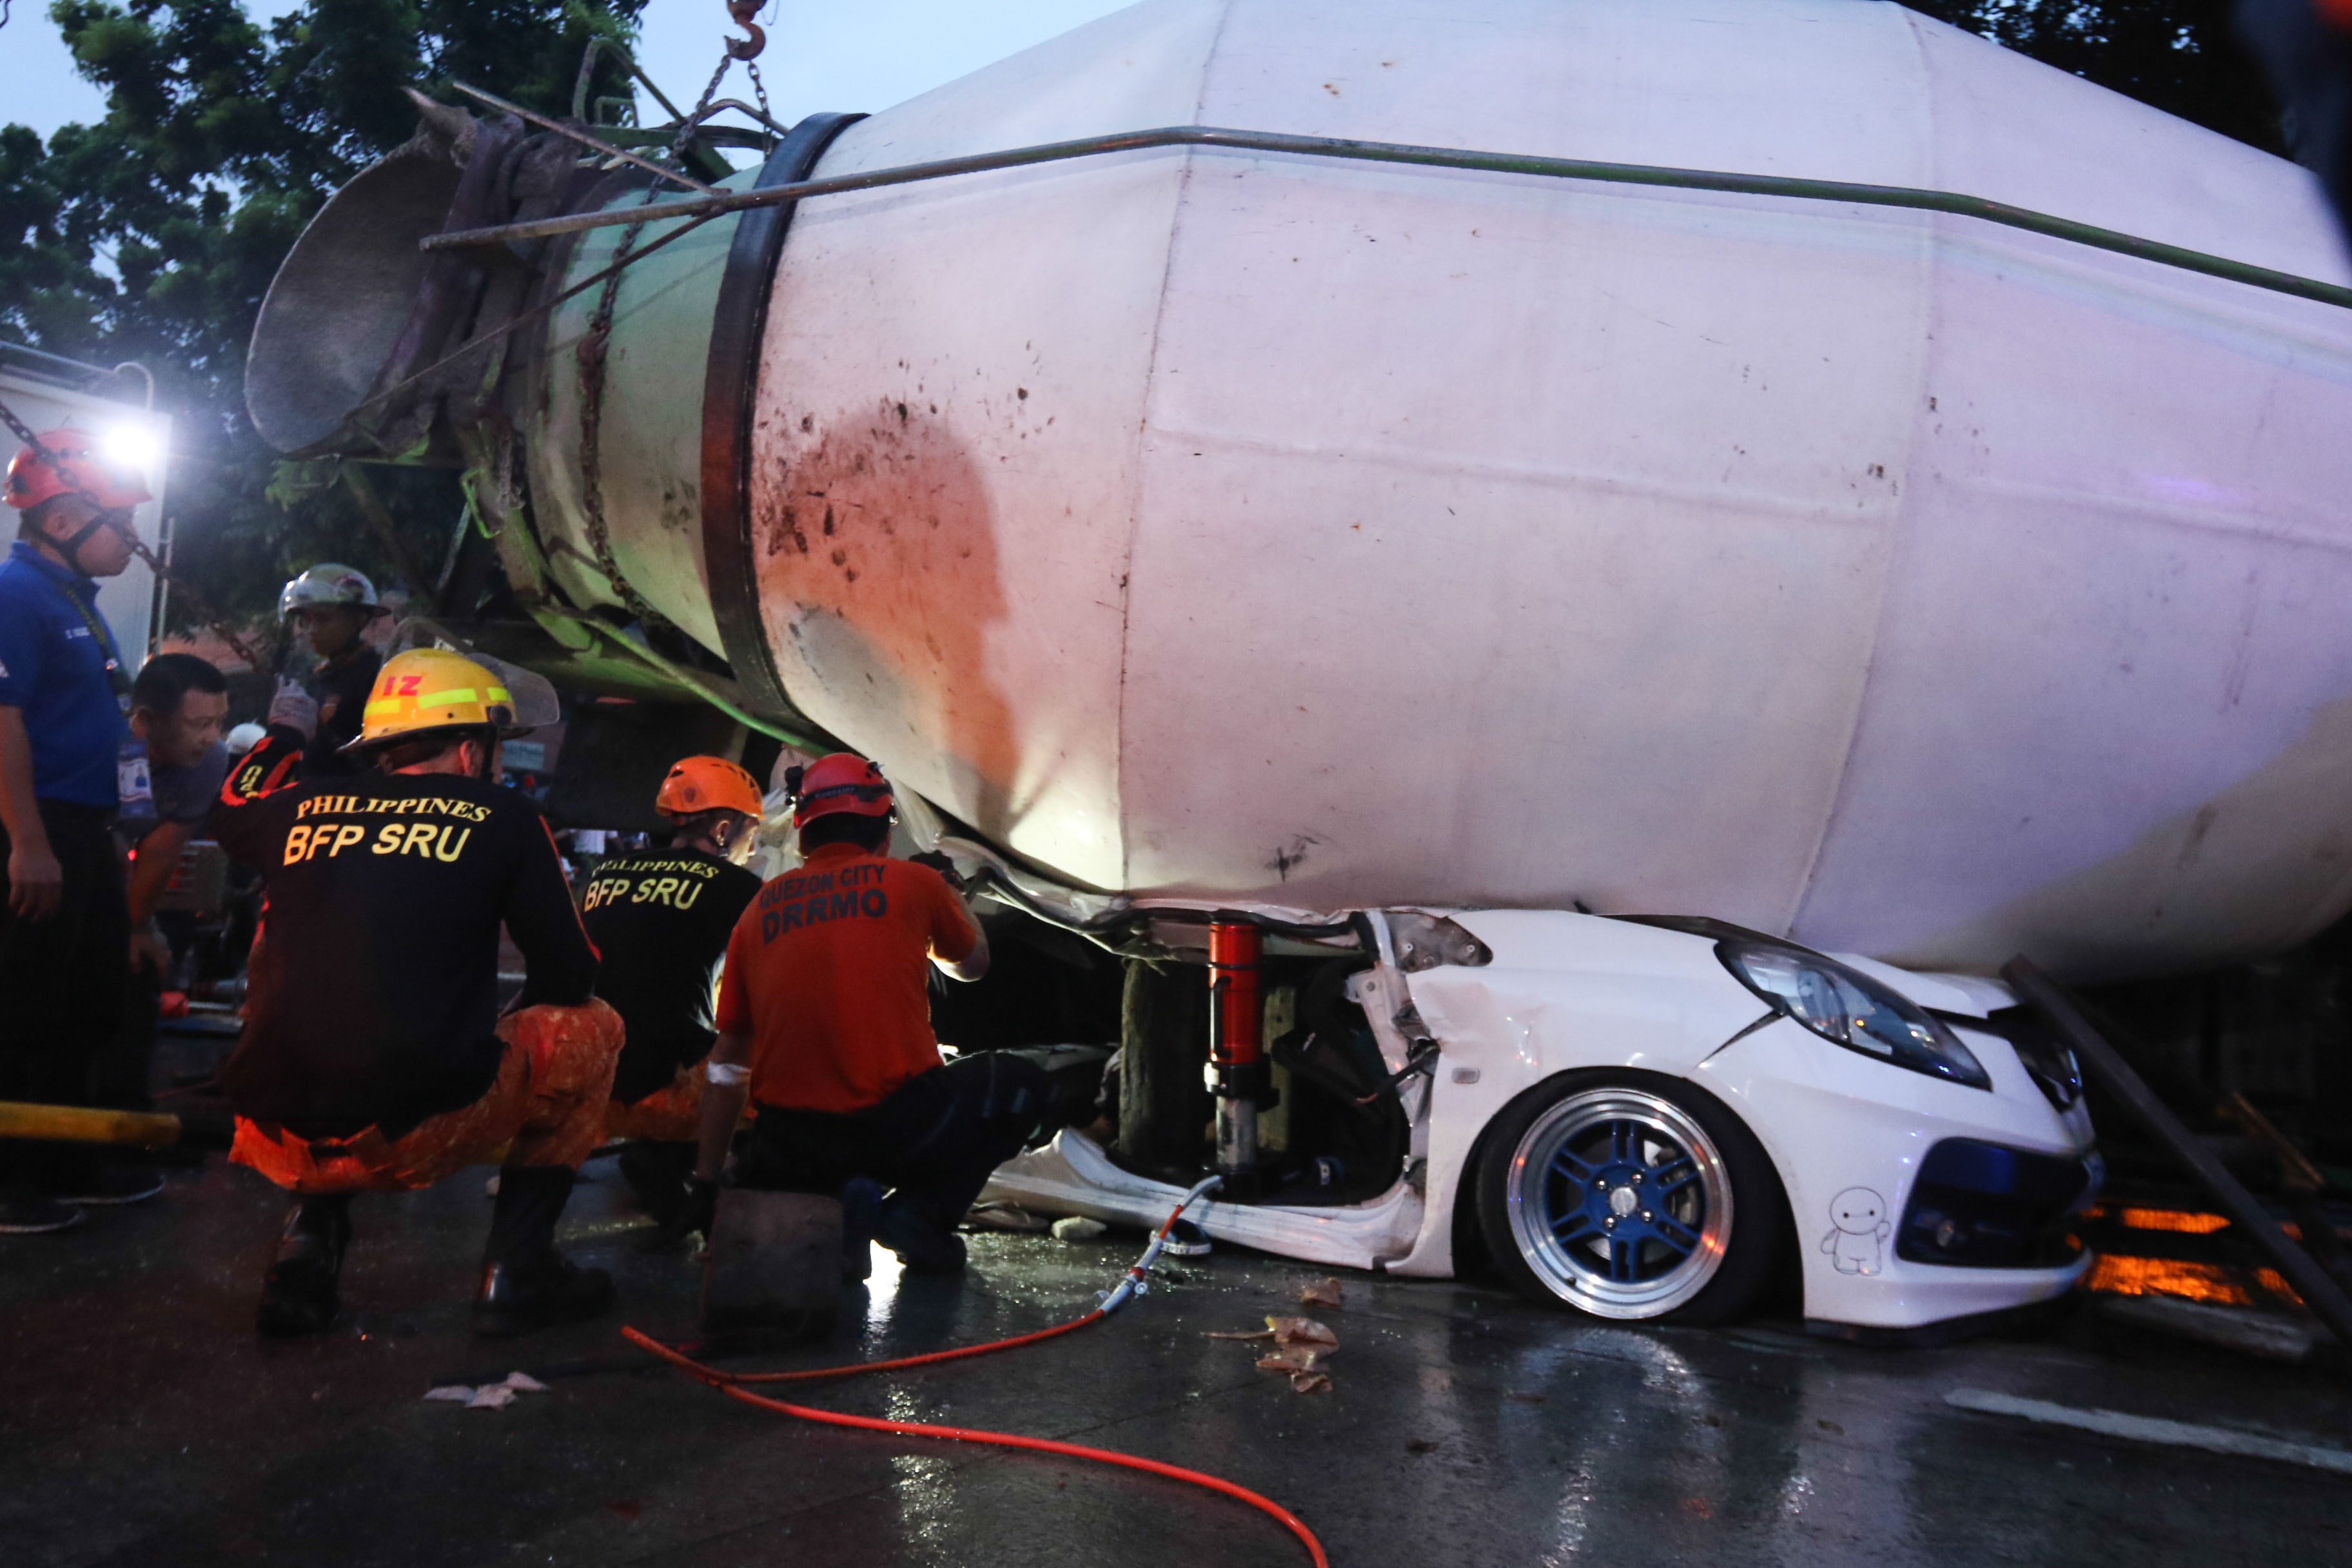 CRUSHED. A person is killed when a cement mixer truck topples over a Honda Brio along Mindanao Avenue in Quezon City on August 15, 2017. Photo by Jasmin Dulay/Rappler   